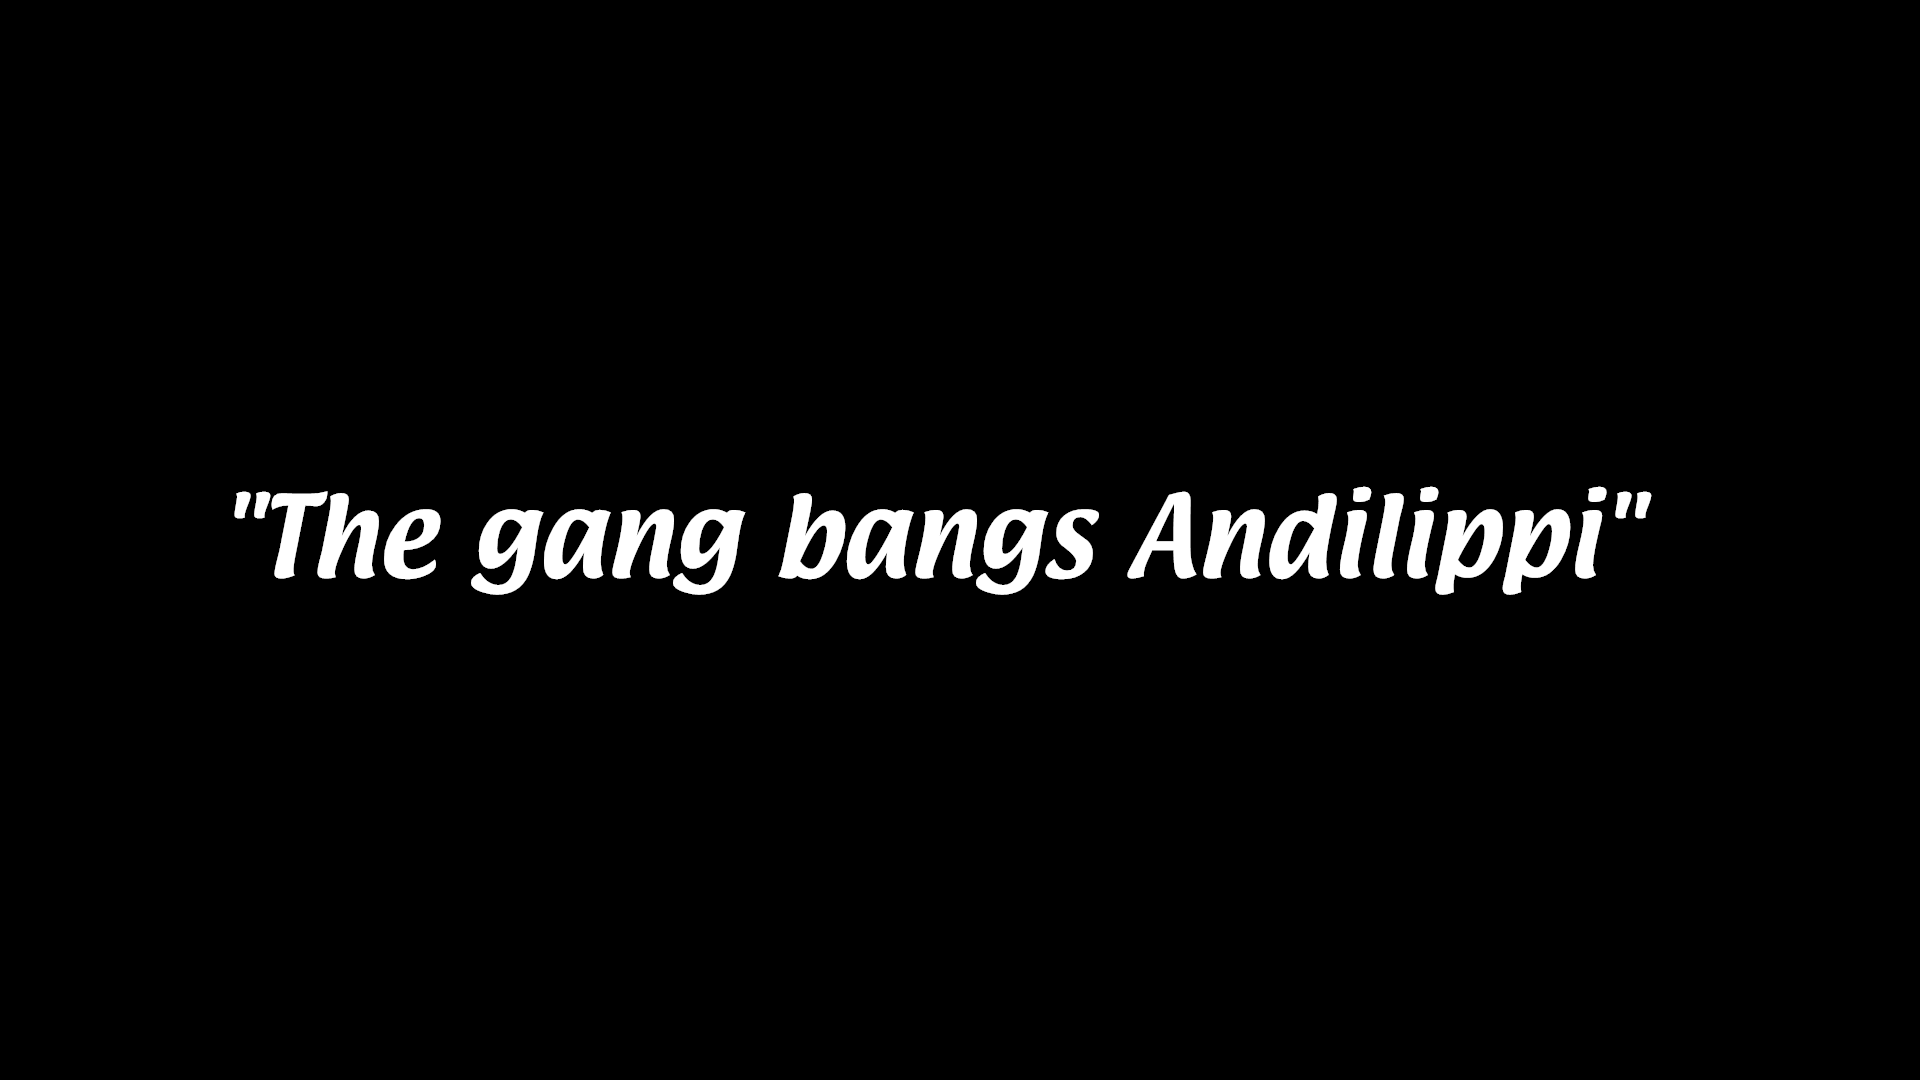 It's Always Sunny Title Card - Effect